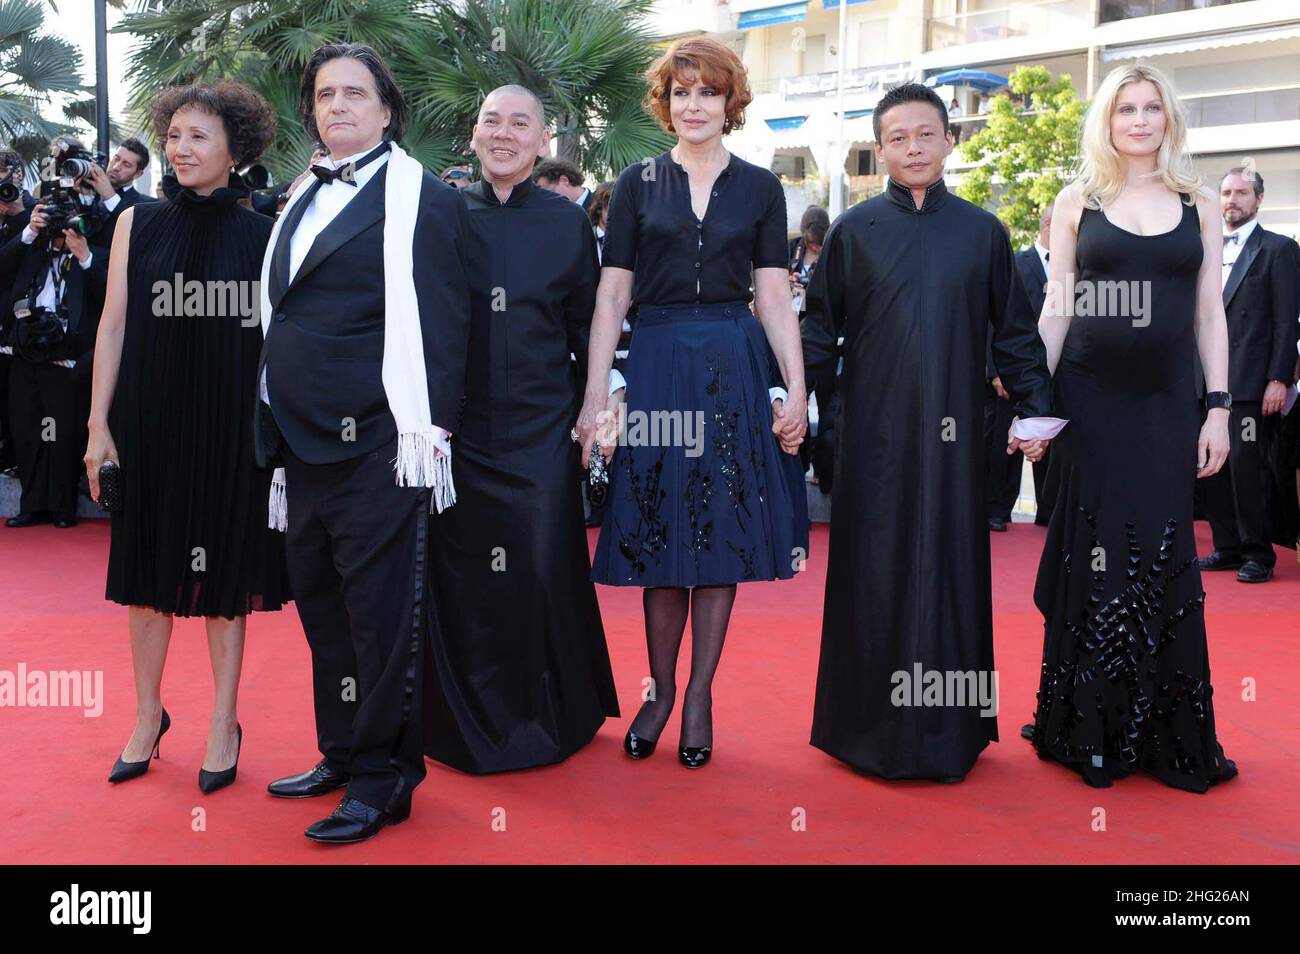 Yi-Ching Lu, Jean-Pierre Leaud, director Ming-liang Tsai, actors Fanny Ardant, Kang-sheng Lee and Laetitia Casta arriving at the premiere for Visage held at the Palais des Festivals. Part of the 62nd Festival de Film, Cannes. Stock Photo